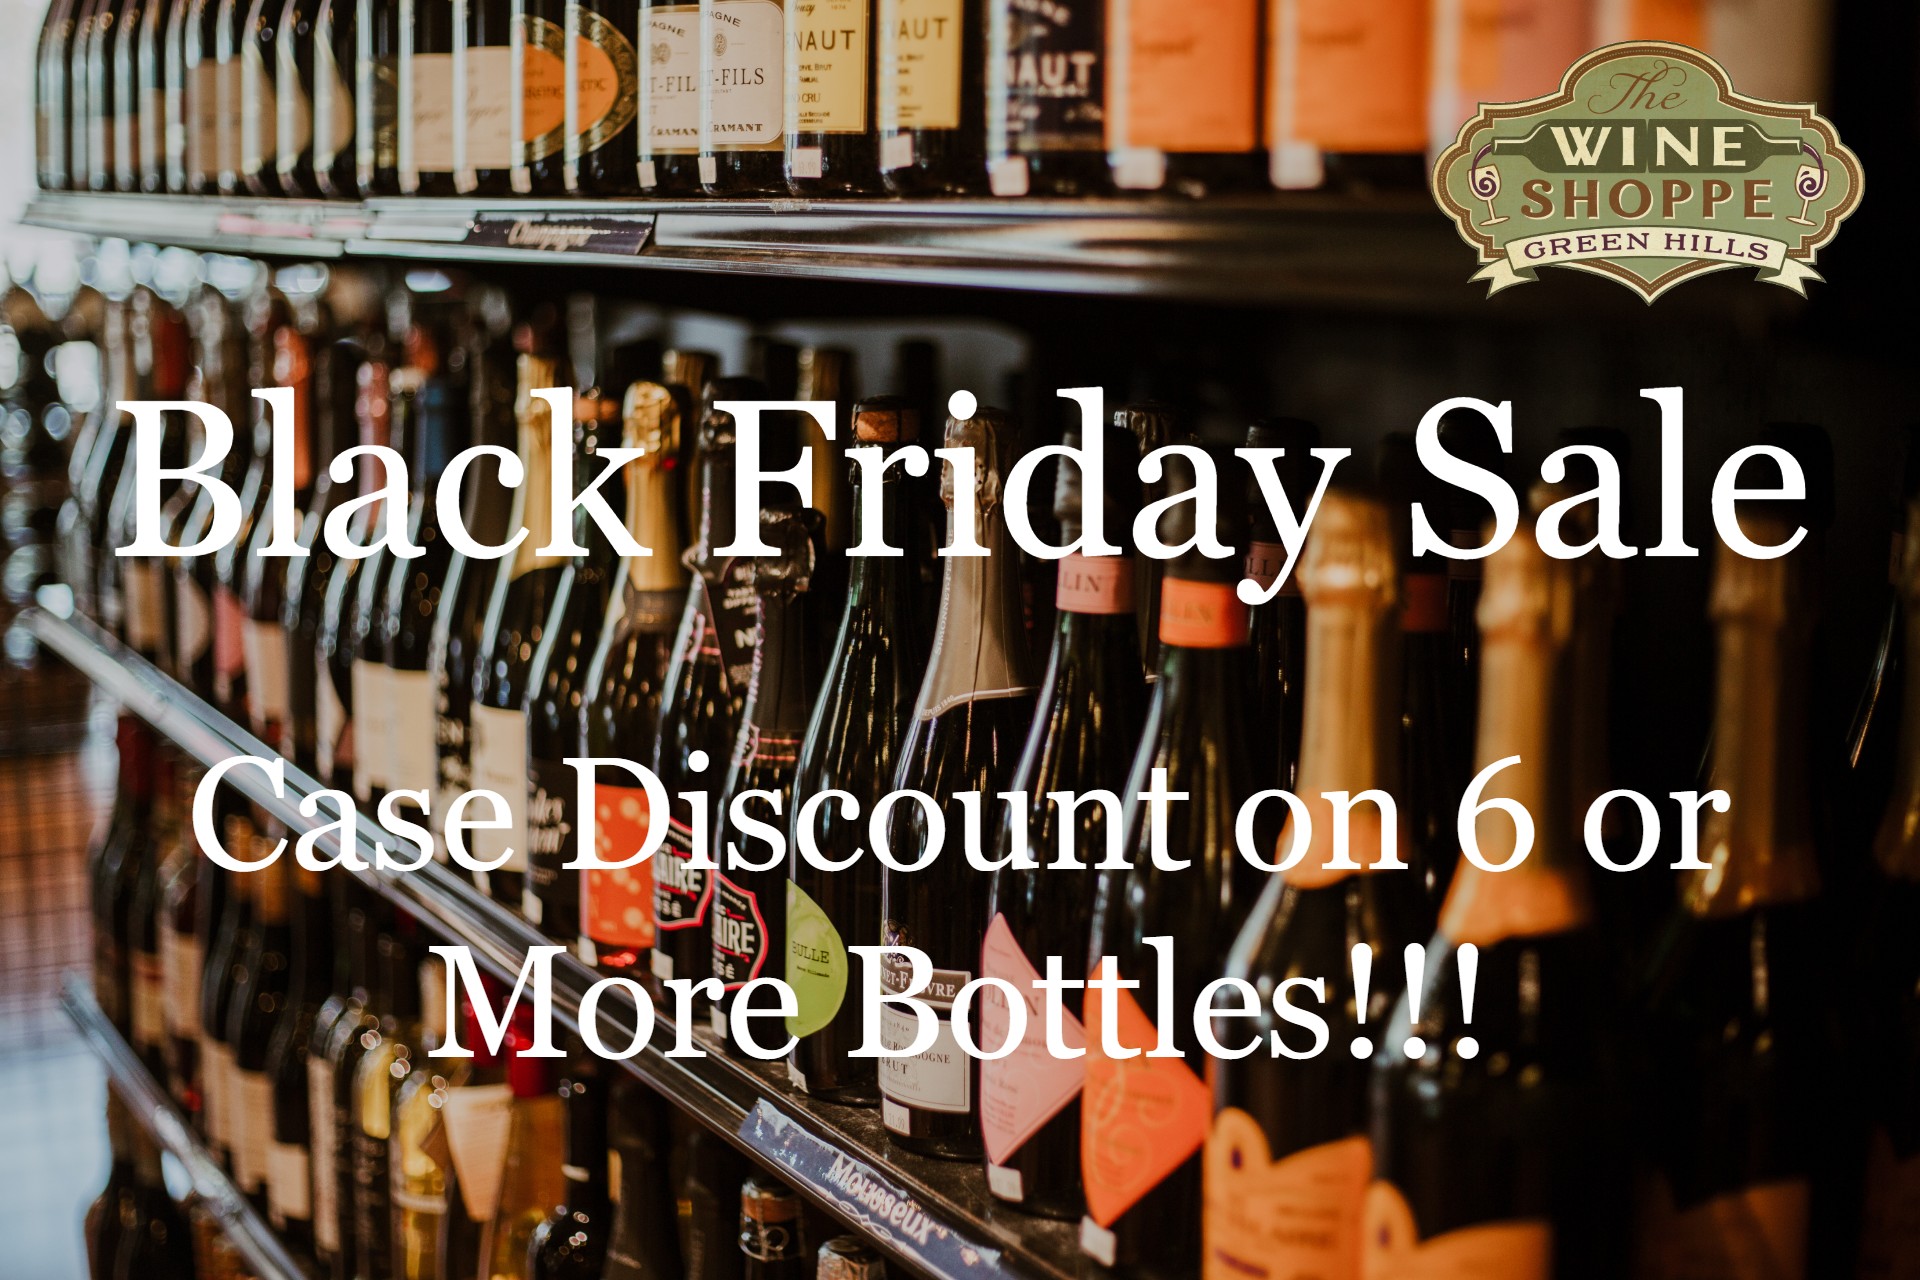 Black Friday Sale!!! The Wine Shoppe at Green Hills